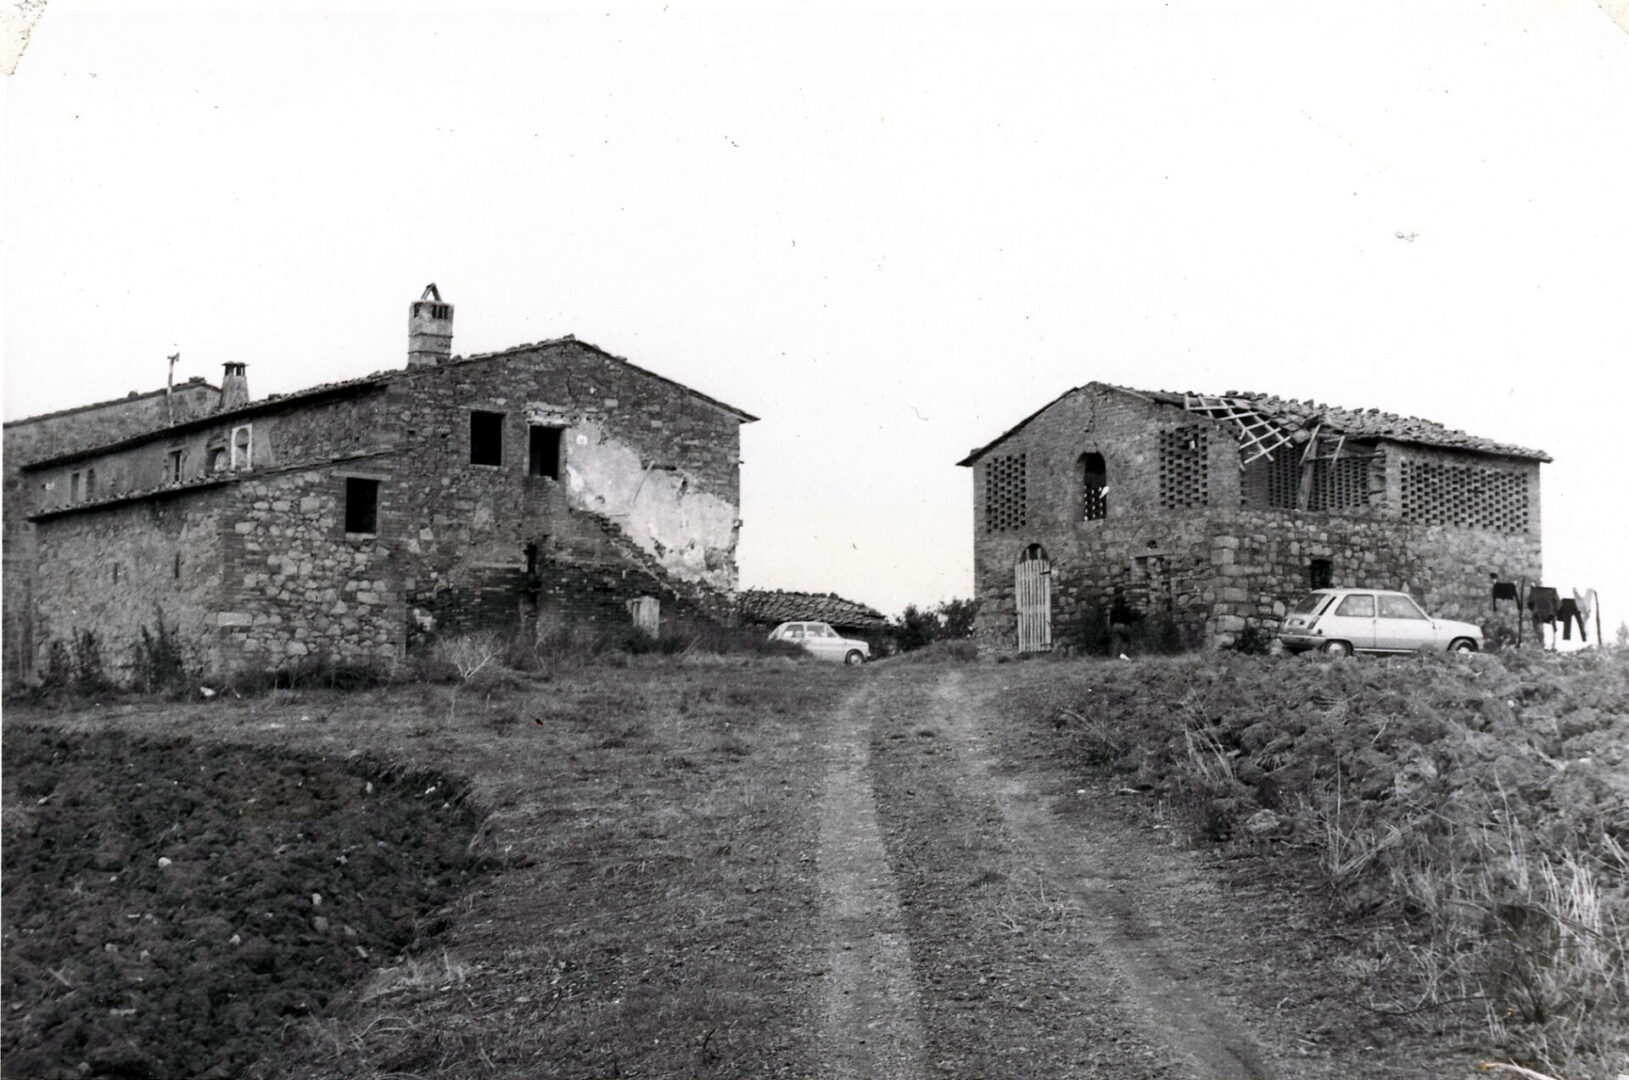 A black and white photo of two old houses